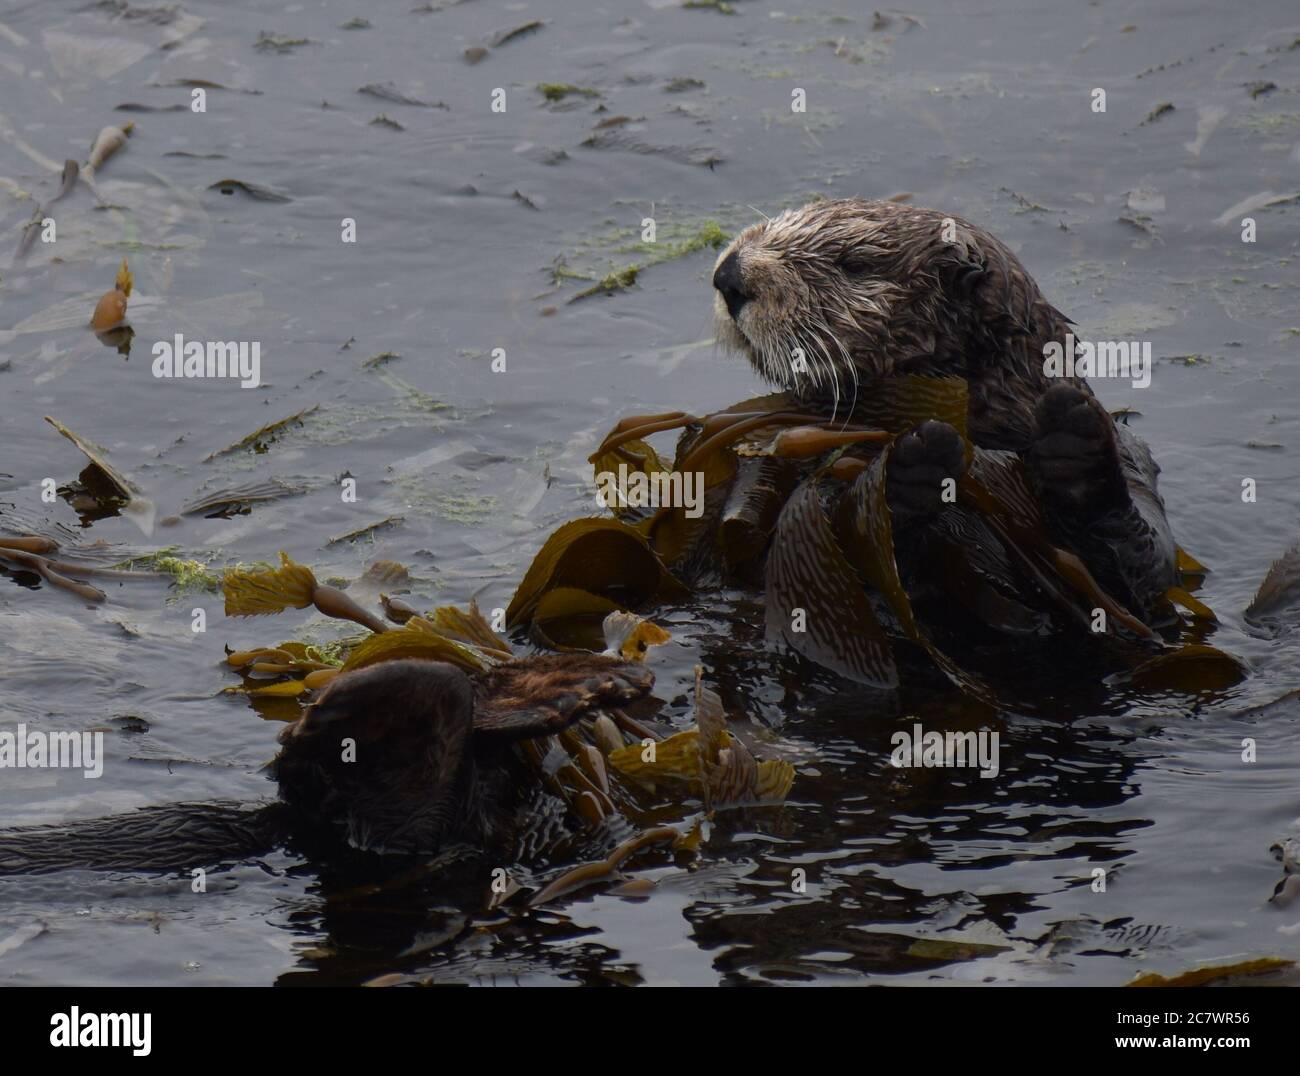 A sea otter (Enhydra lutris) wraps itself in kelp to keep it in place, near the mouth of Elkhorn Slough in California. Stock Photo